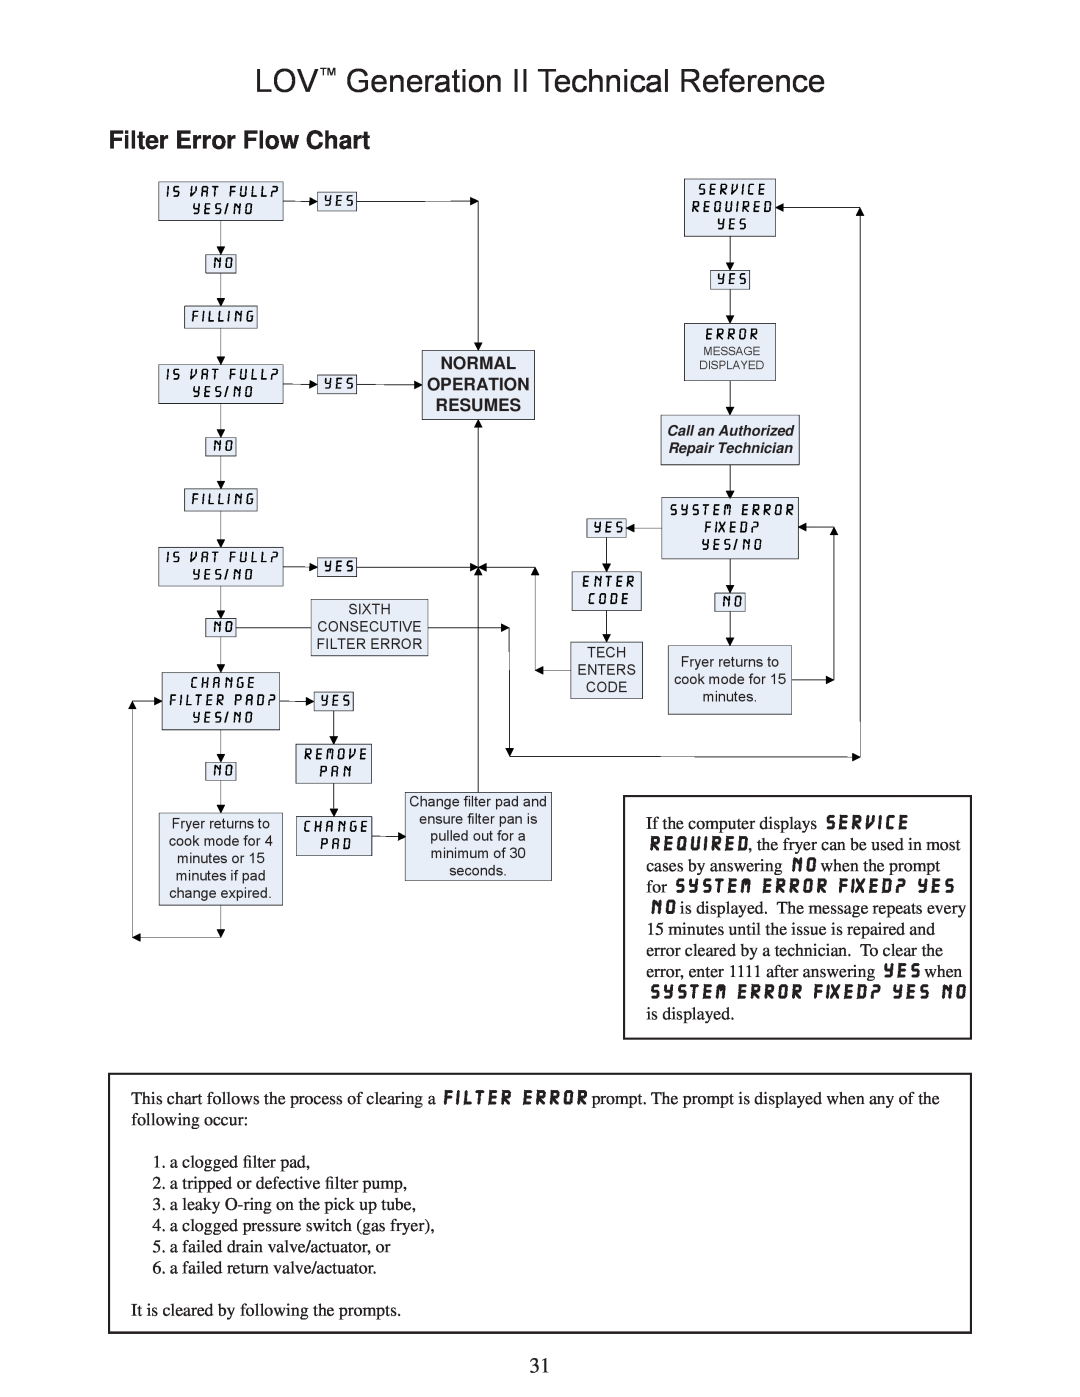 Frymaster M3000 manual Filter Error Flow Chart, LOV Generation II Technical Reference, Normal Operation Resumes 